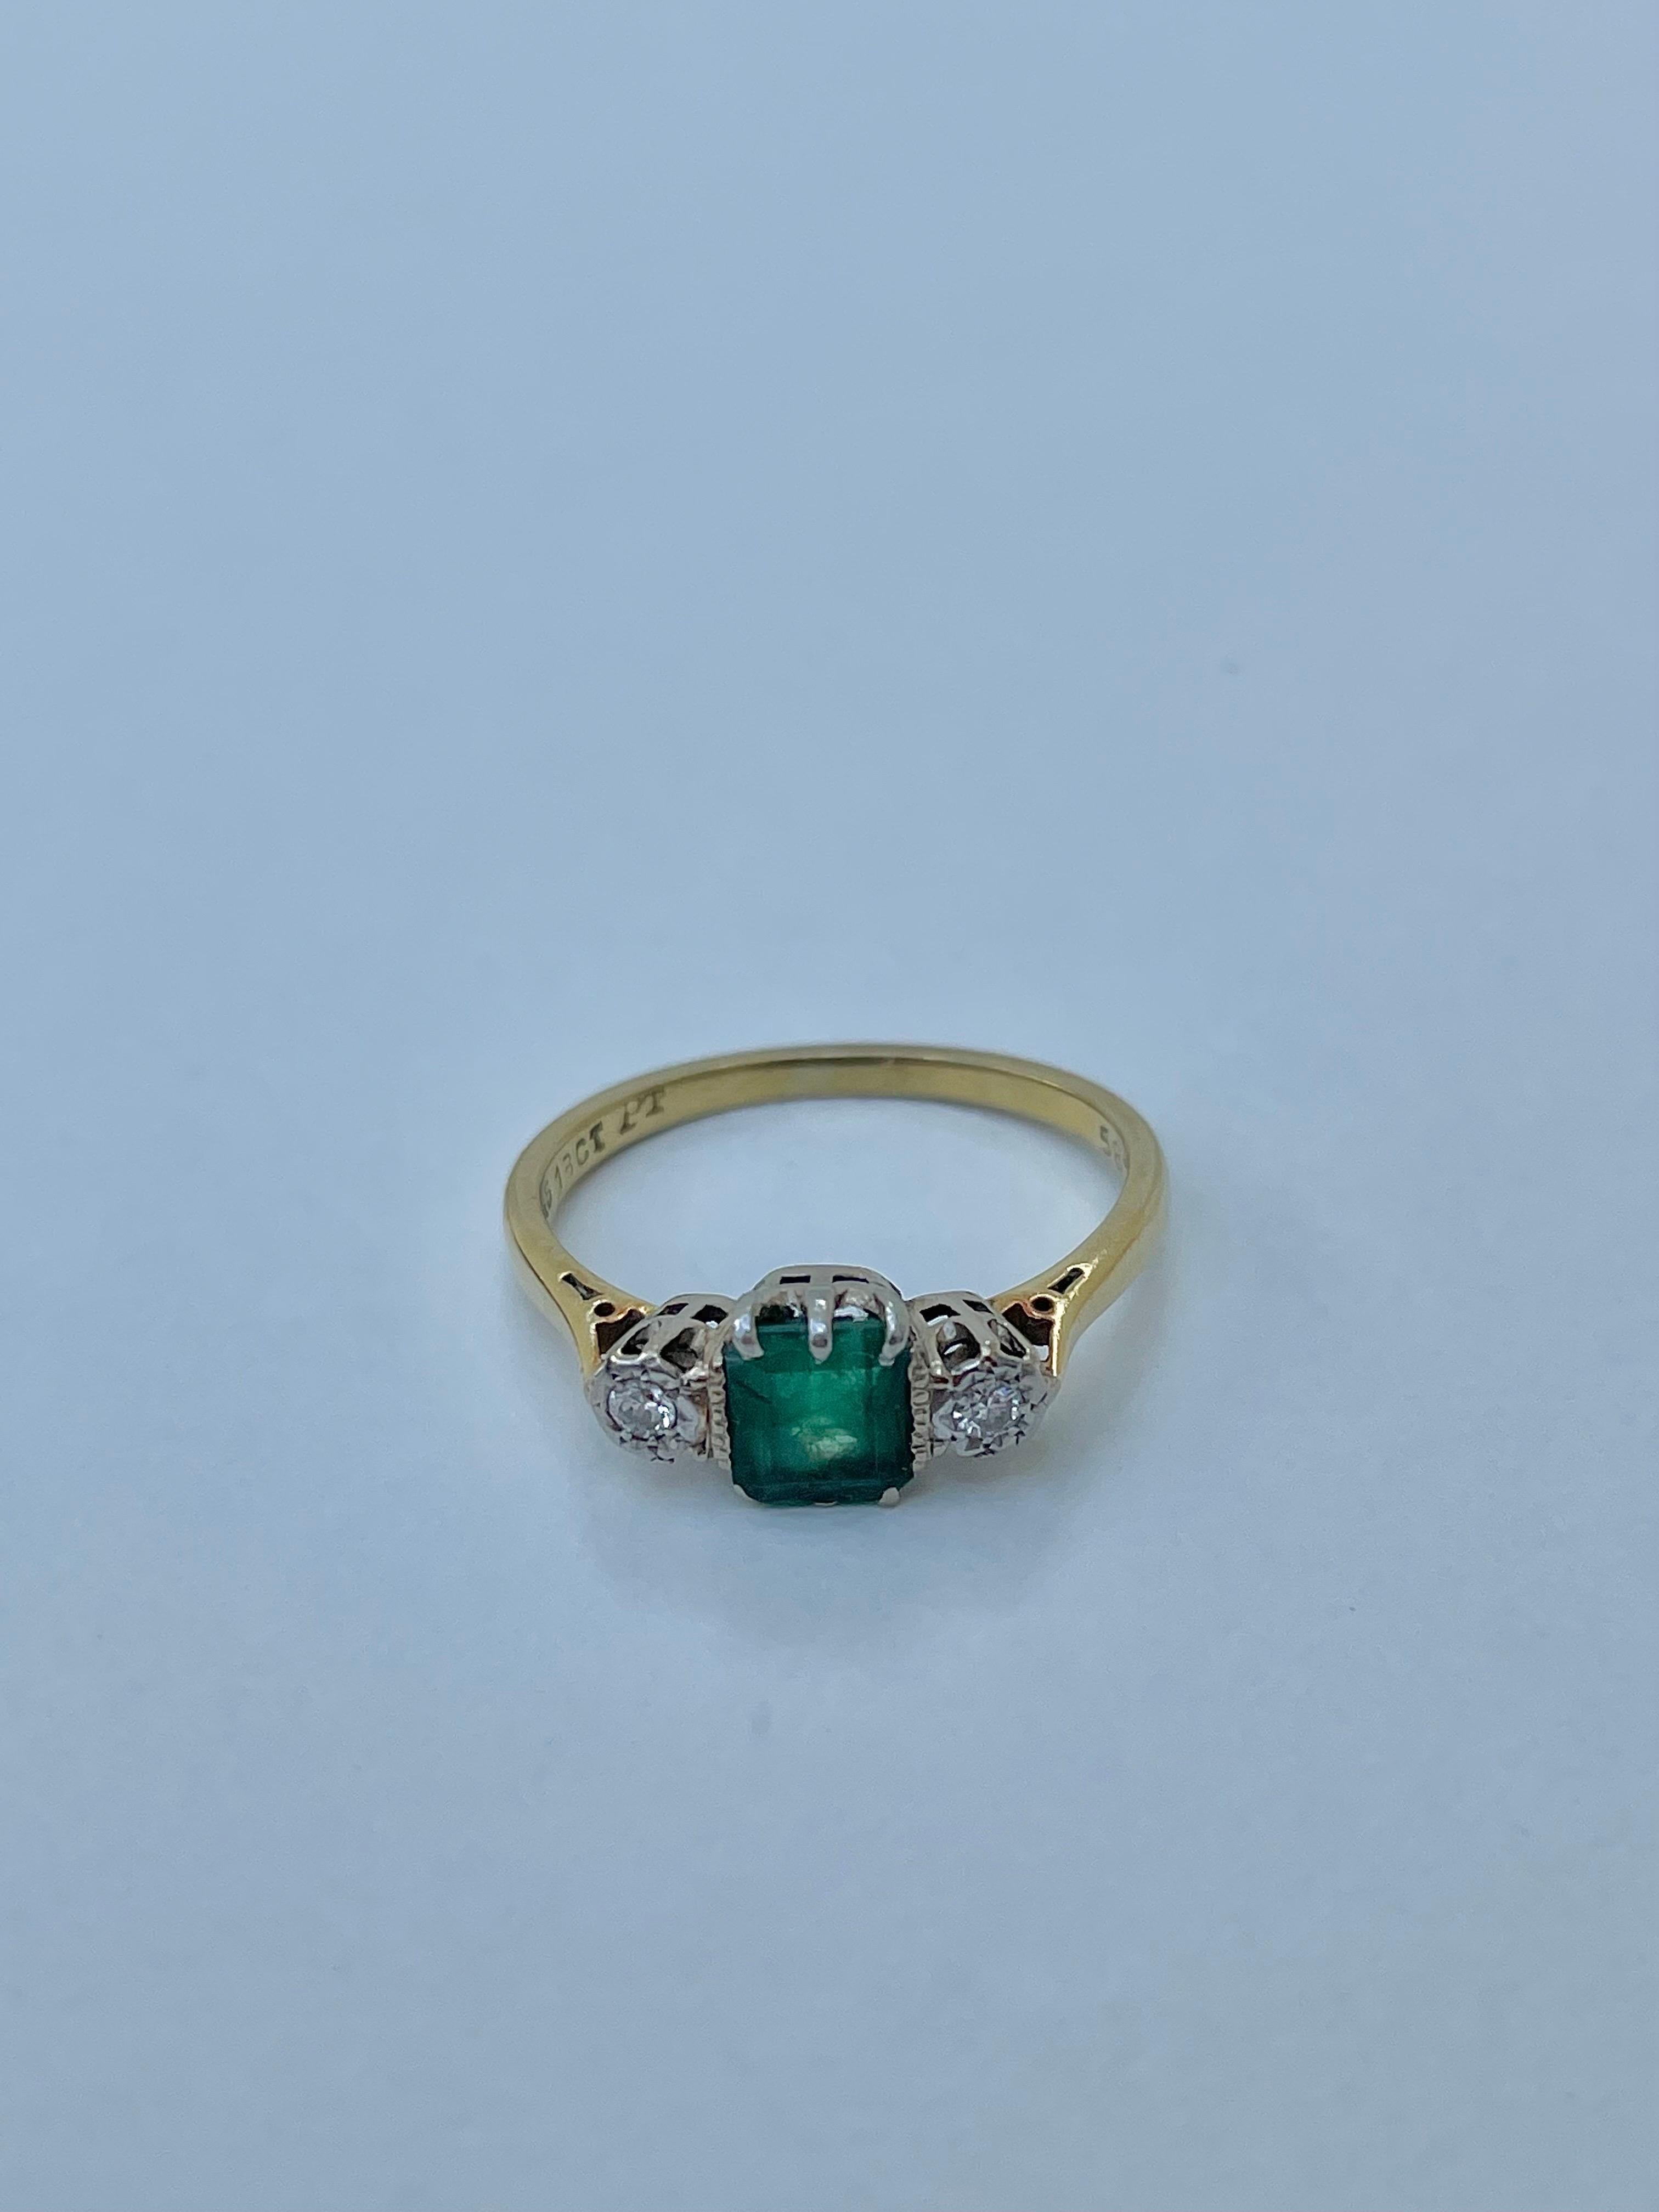 Art Deco Emerald and Diamond 3 Stone Ring in 18ct Yellow Gold 

sweet 3 stone ring, elegant and classy 

The item comes without the box in the photos but will be presented in a gift box

Measurements: weight 2.65g, size UK M, head of ring 17.8mm x